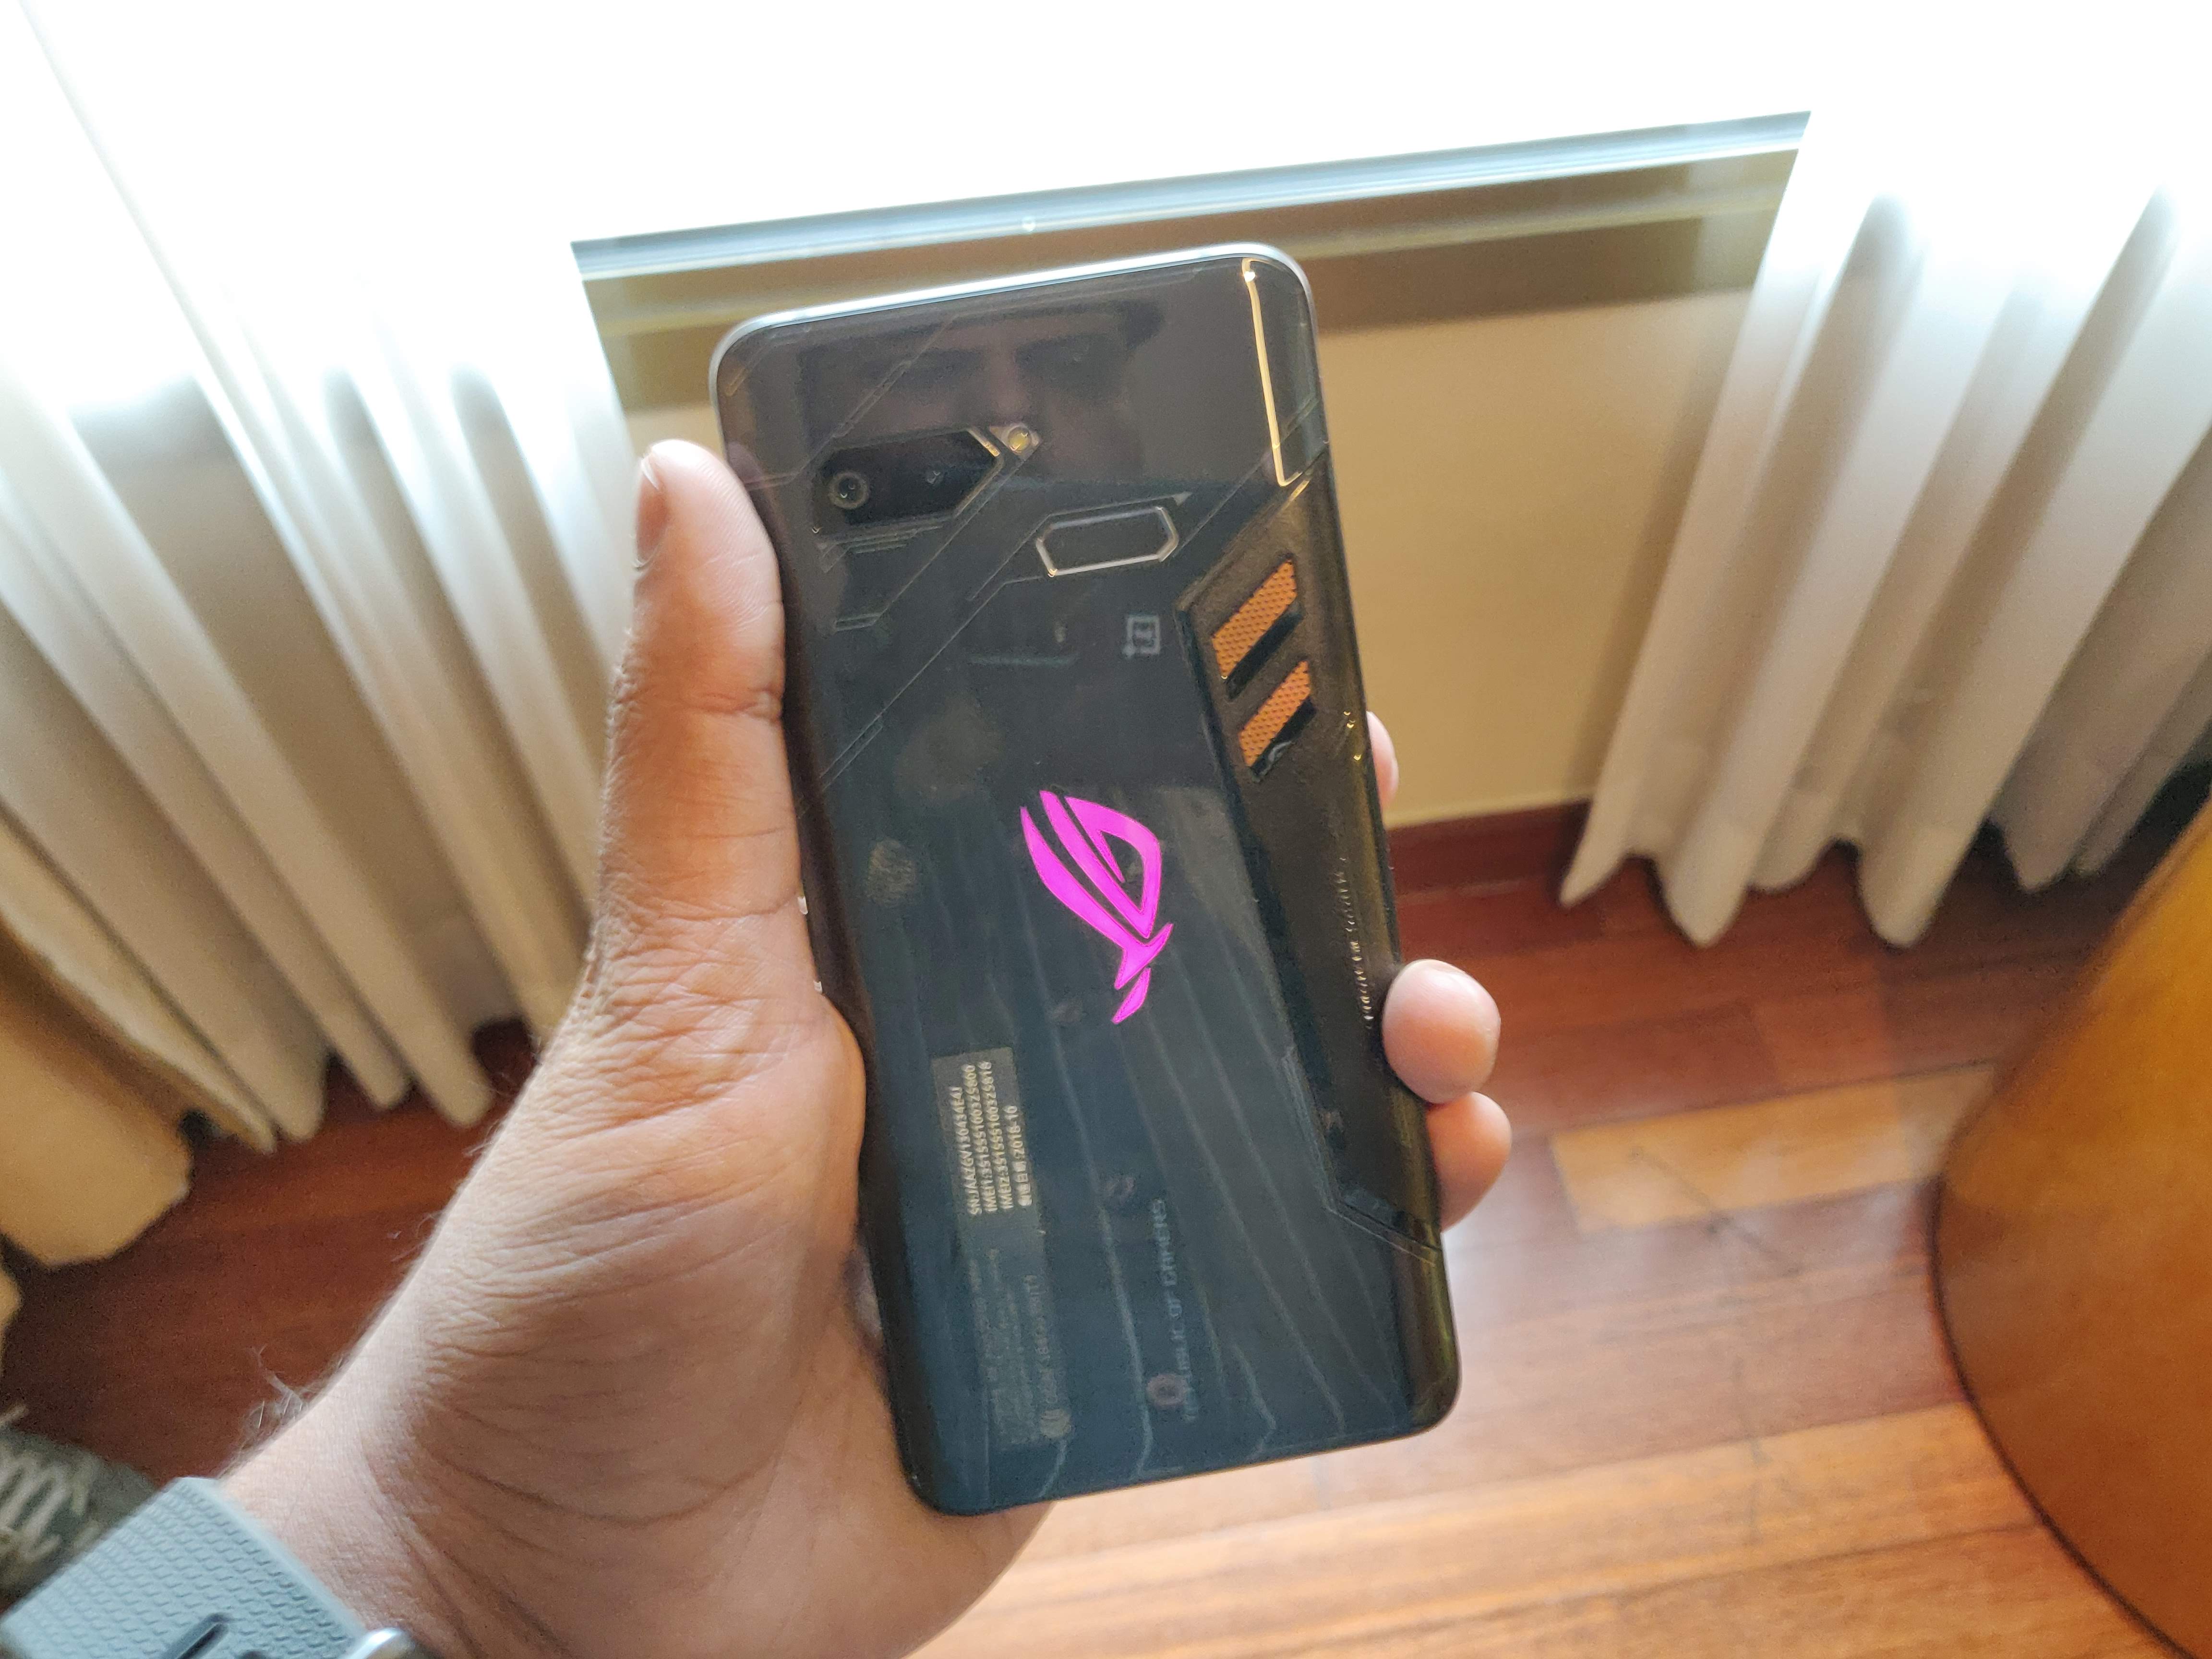 ASUS ROG Phone with 6-inch FHD+ AMOLED 90Hz HDR display, 8GB RAM